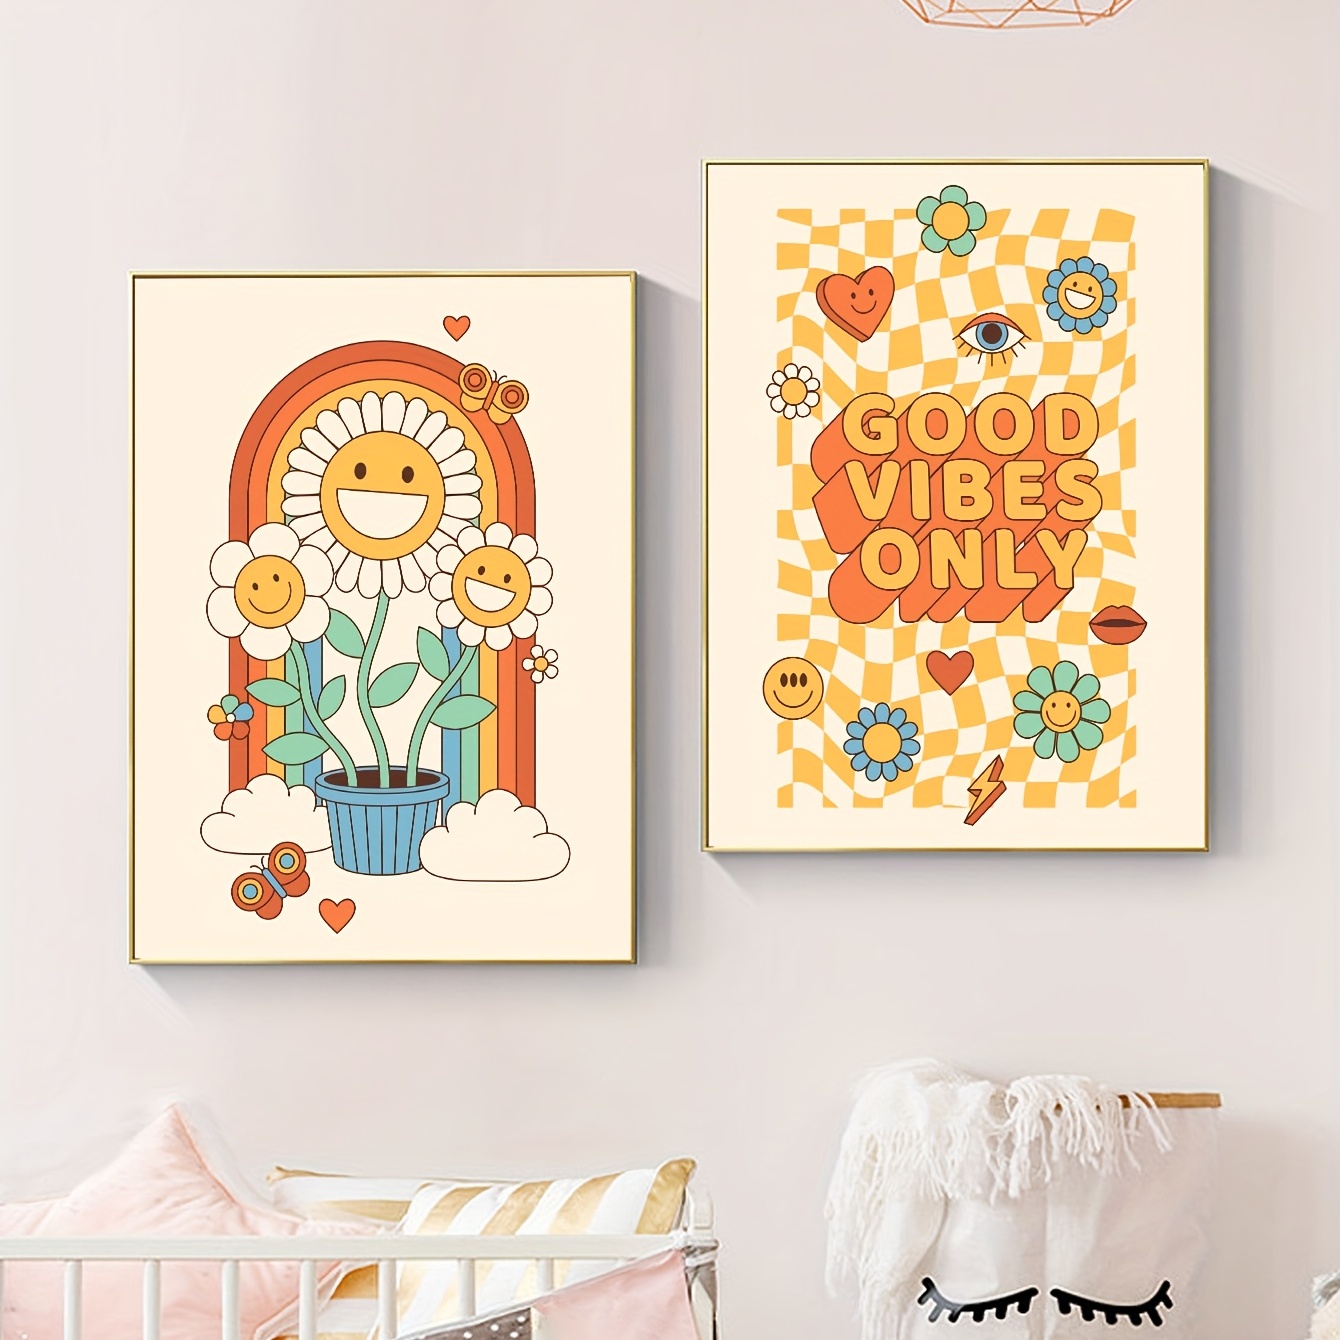 Good Vibes Only - Poster for all rooms